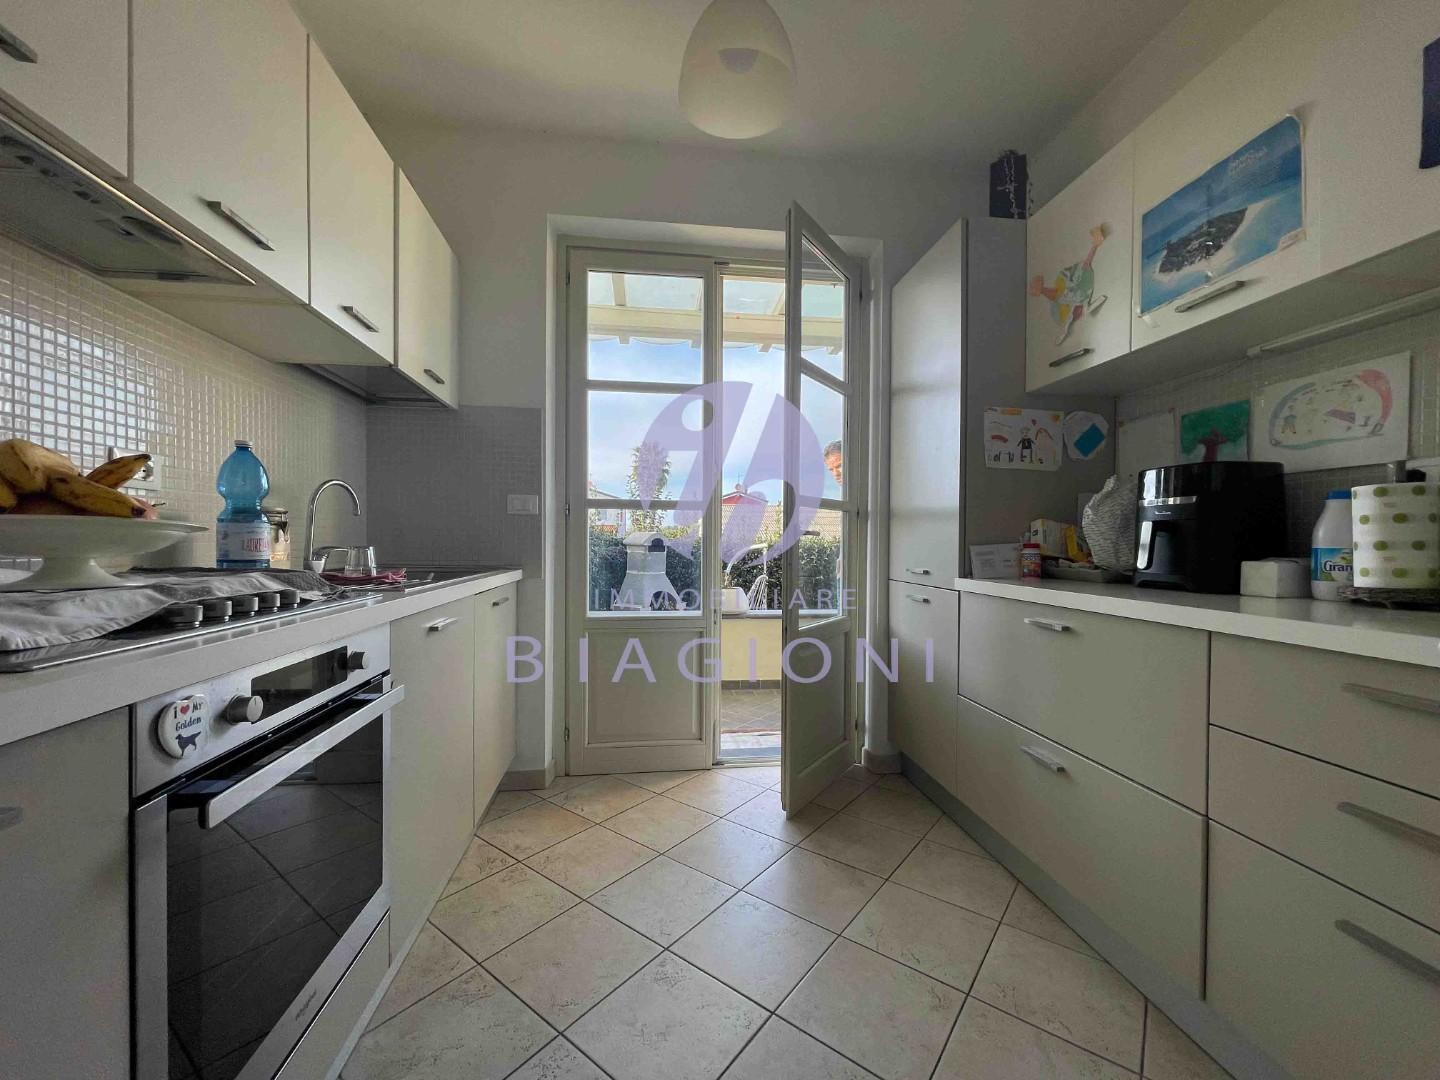 Semi-detached house for sale, ref. 28006